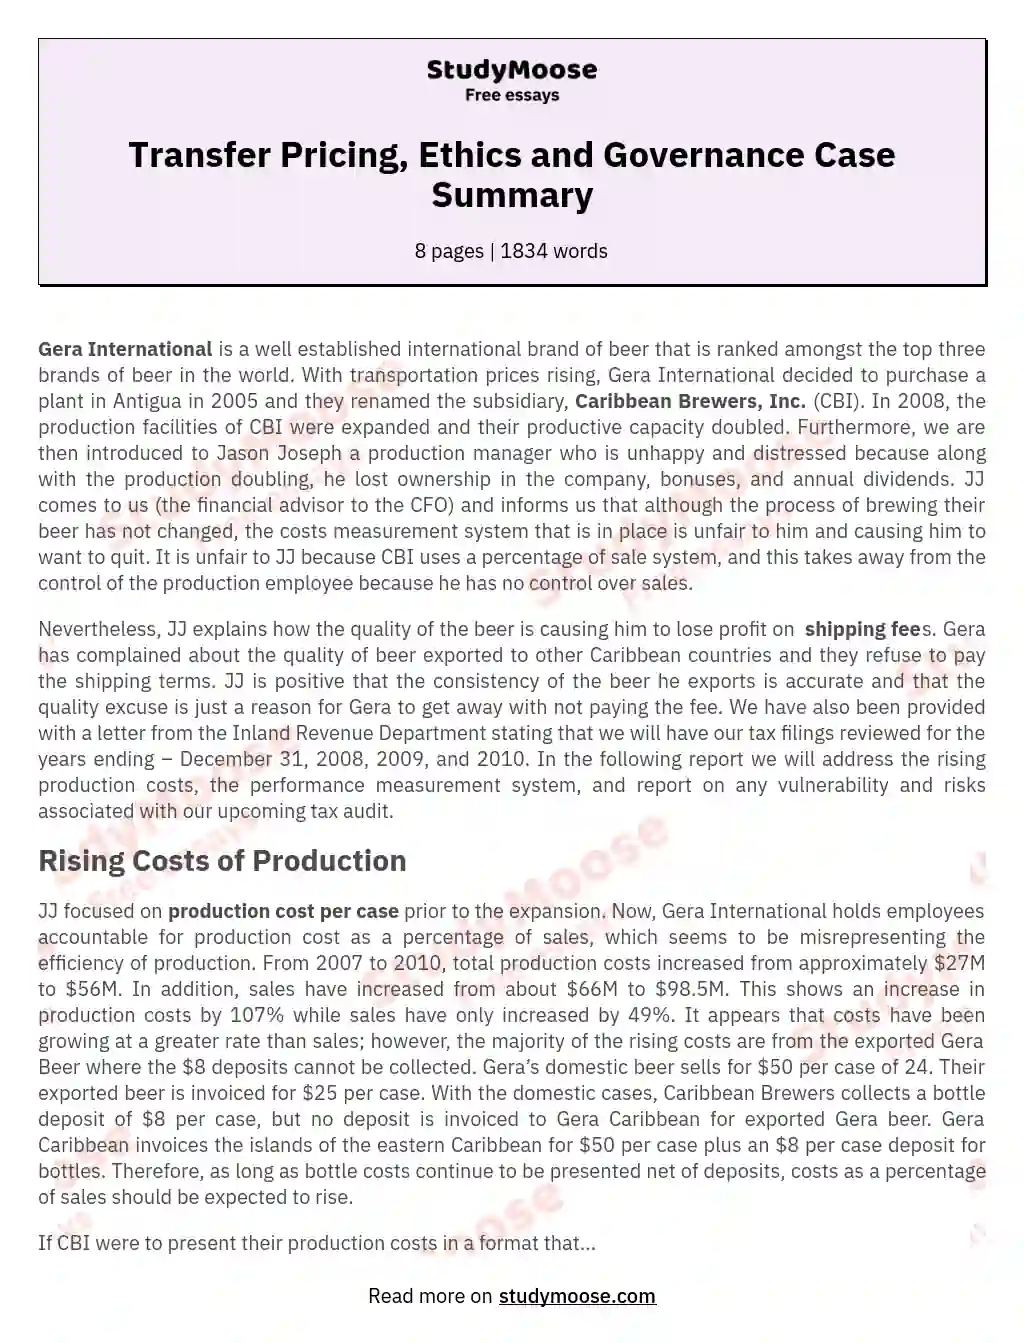 Transfer Pricing, Ethics and Governance Case Summary essay